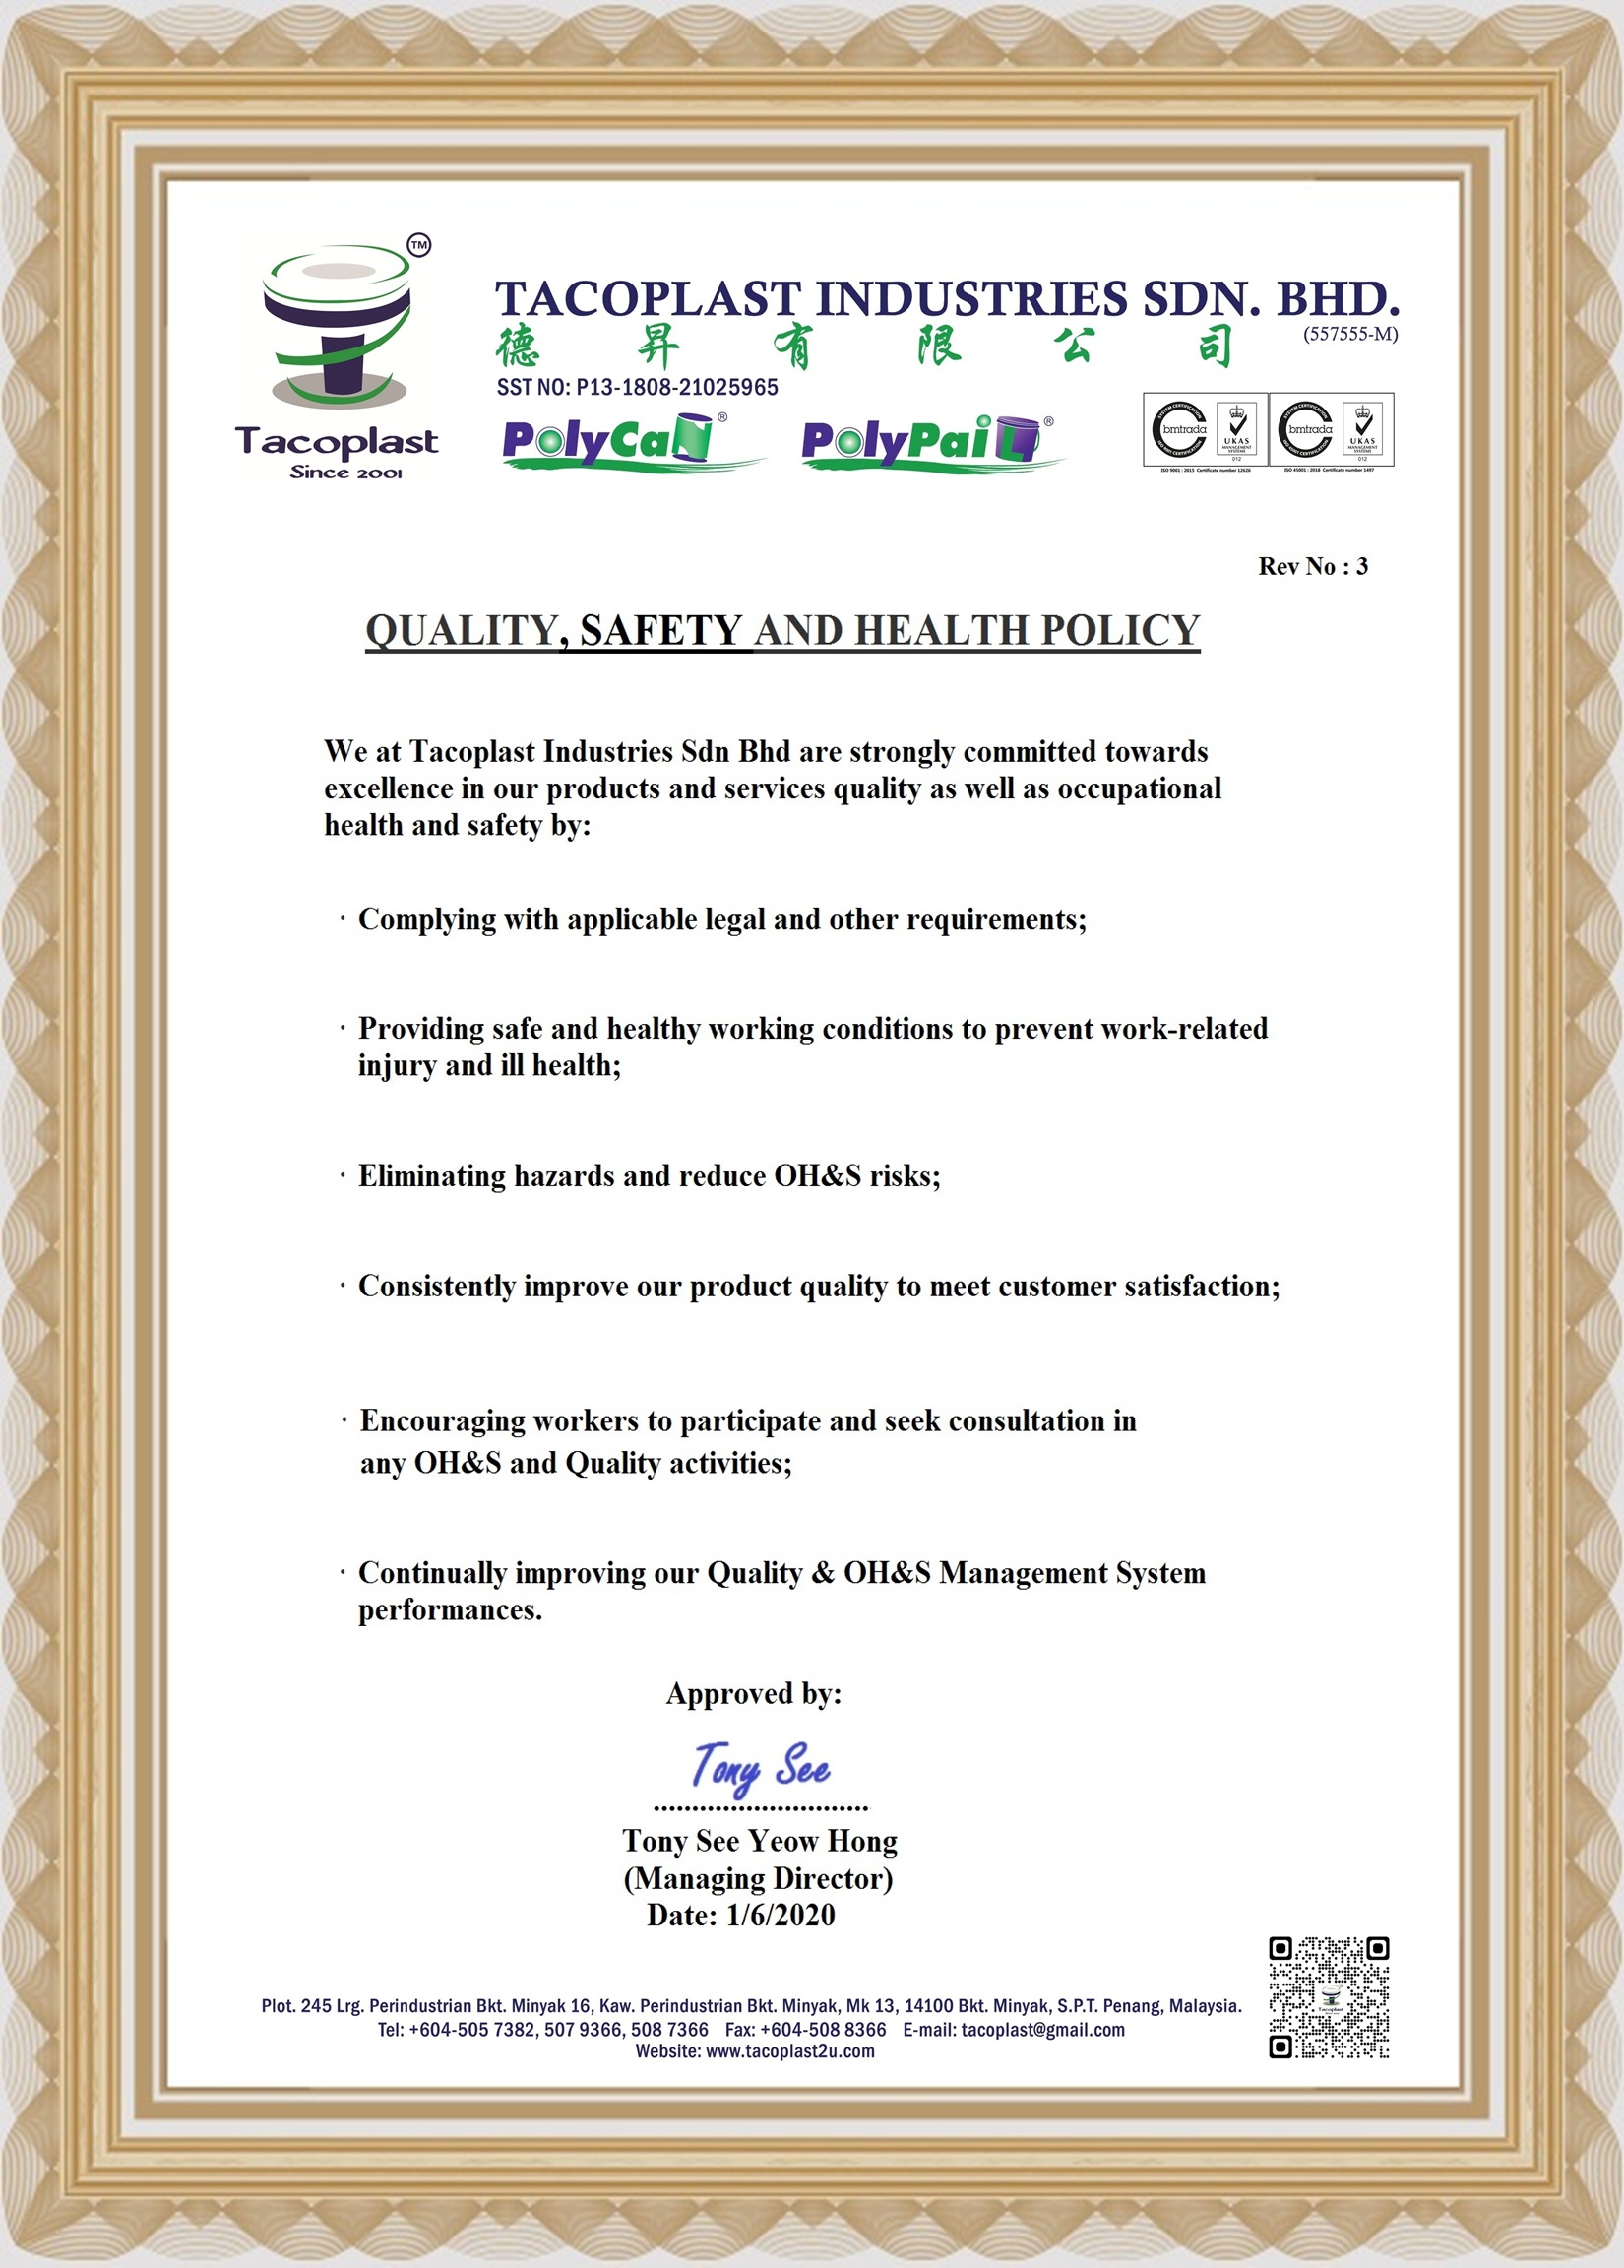 Quality Safety and Health Policy 2020.6.1 1